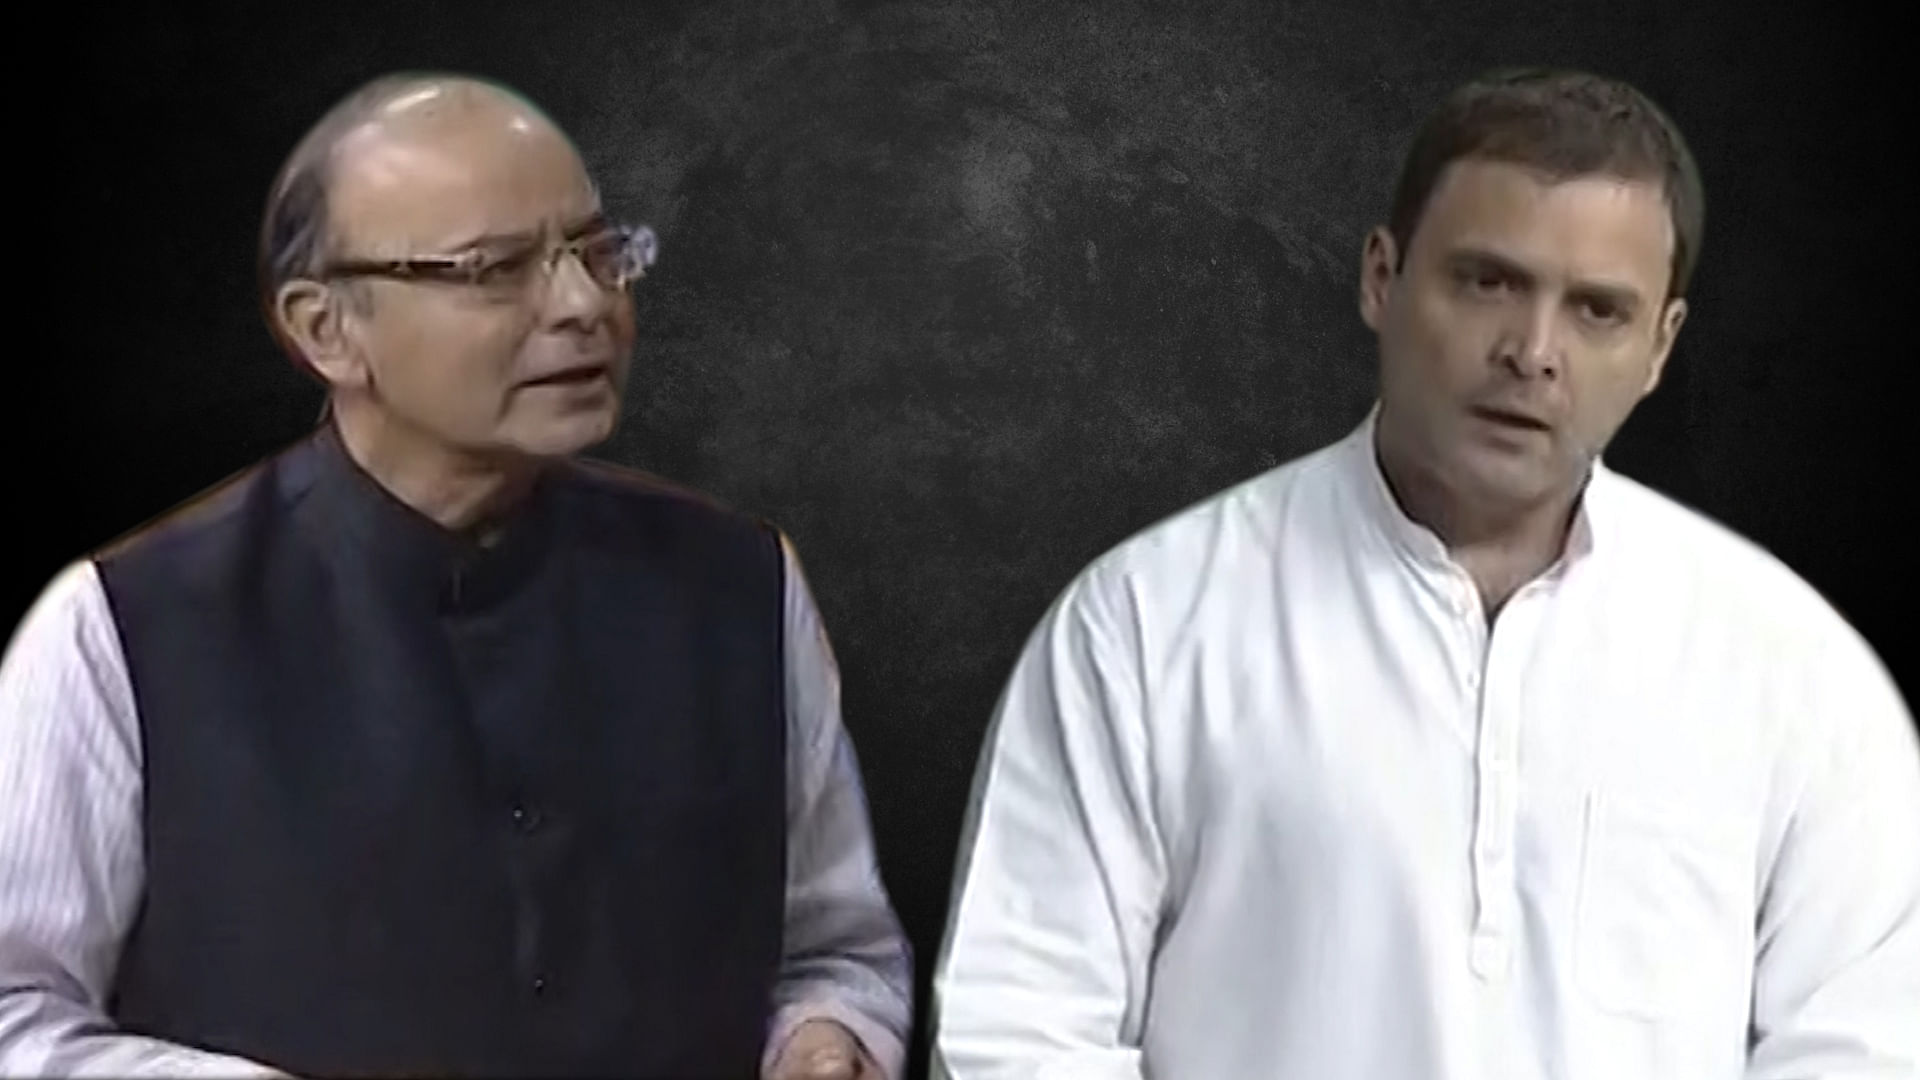 Congress Vice President Rahul Gandhi and Finance Minister Arun Jaitley indulged in a heated debate on inflation on Thursday in the Parliament. (Photo: <b>The Quint</b>)